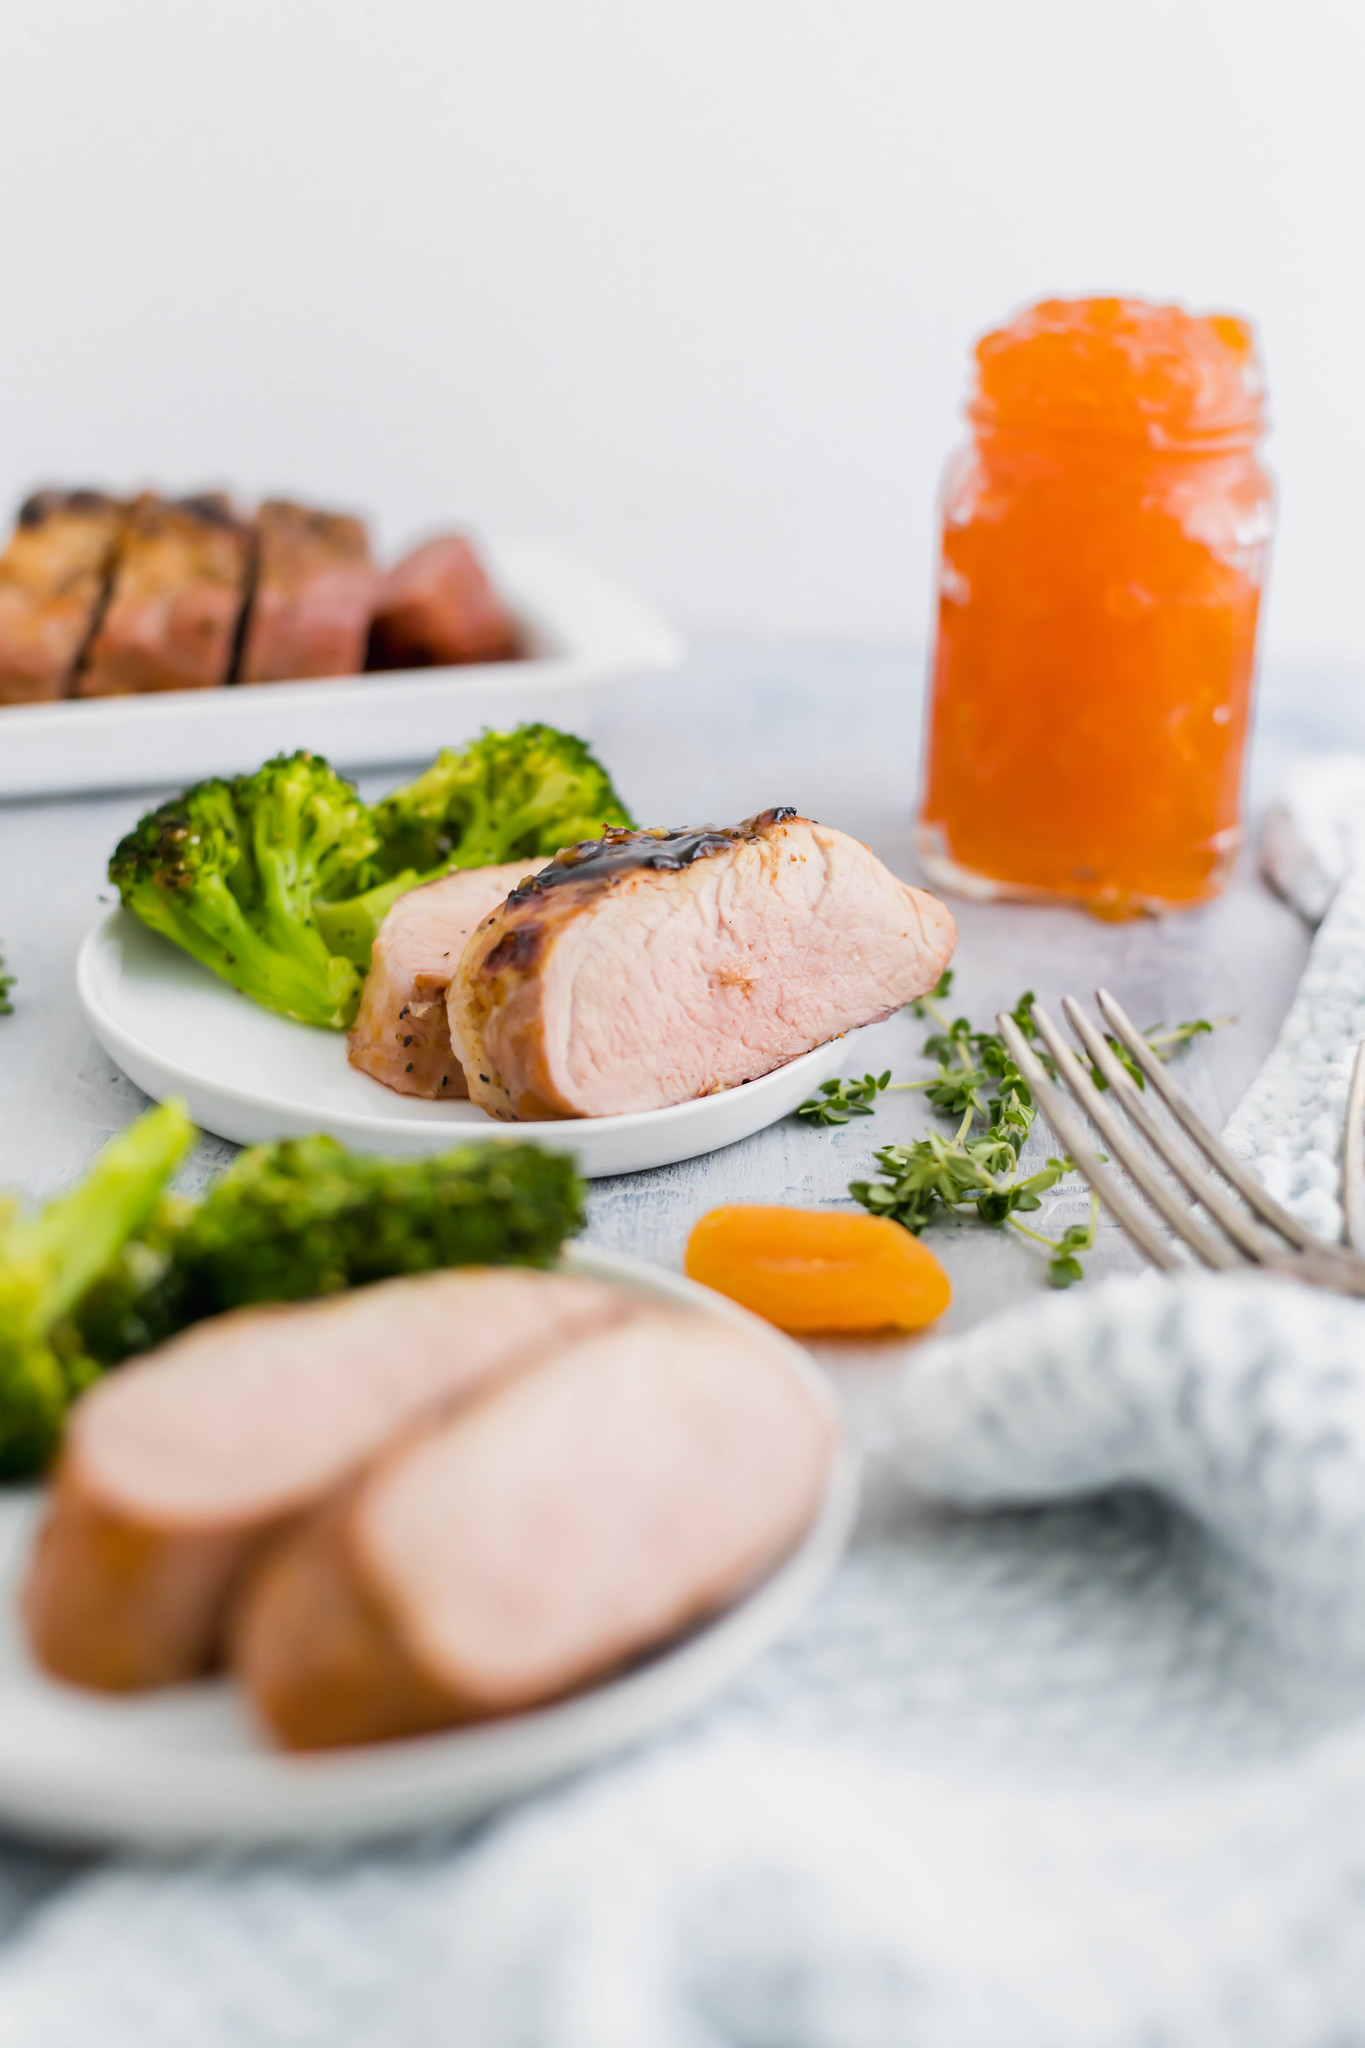 Two white round plates with two slices each of pork tenderloin and roasted broccoli. Plate in background in focus along with a jar of apricot preserves.